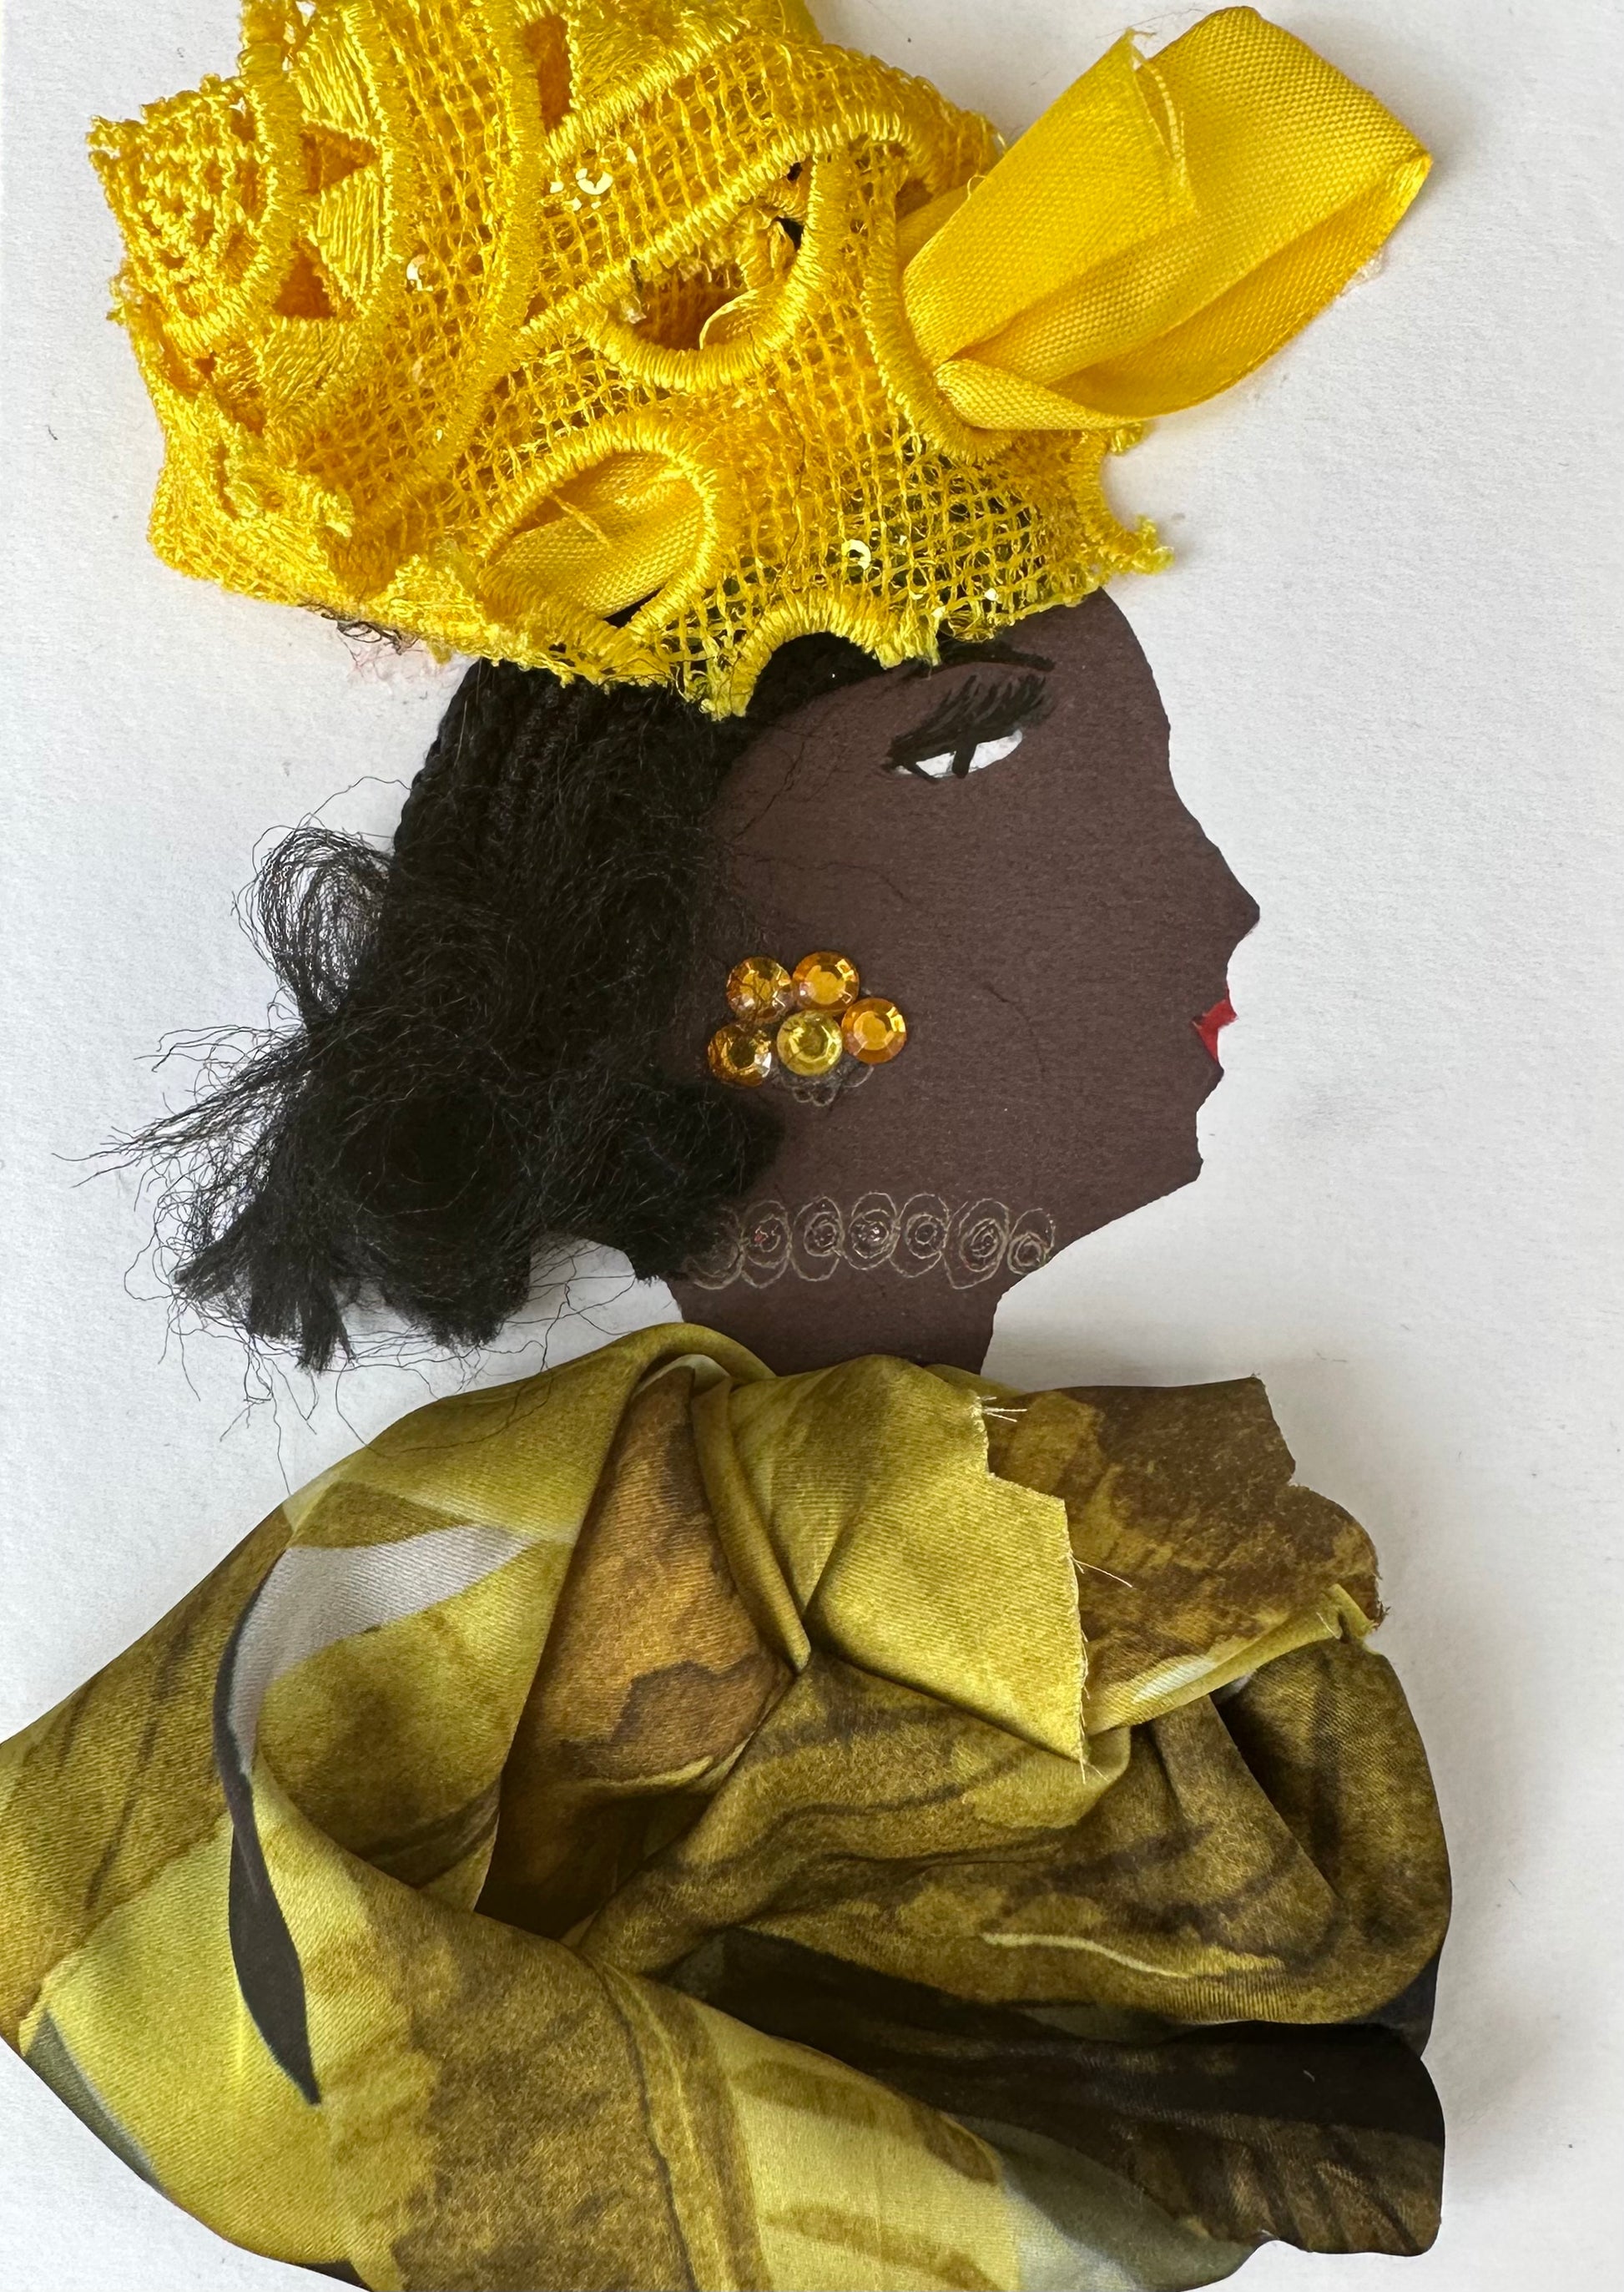 I designed this handmade card of a woman dressed in a yellow and brown patterned blouse. Her hatinator is composed of a lace-like material, and her earrings are golden yellow gemstones. 